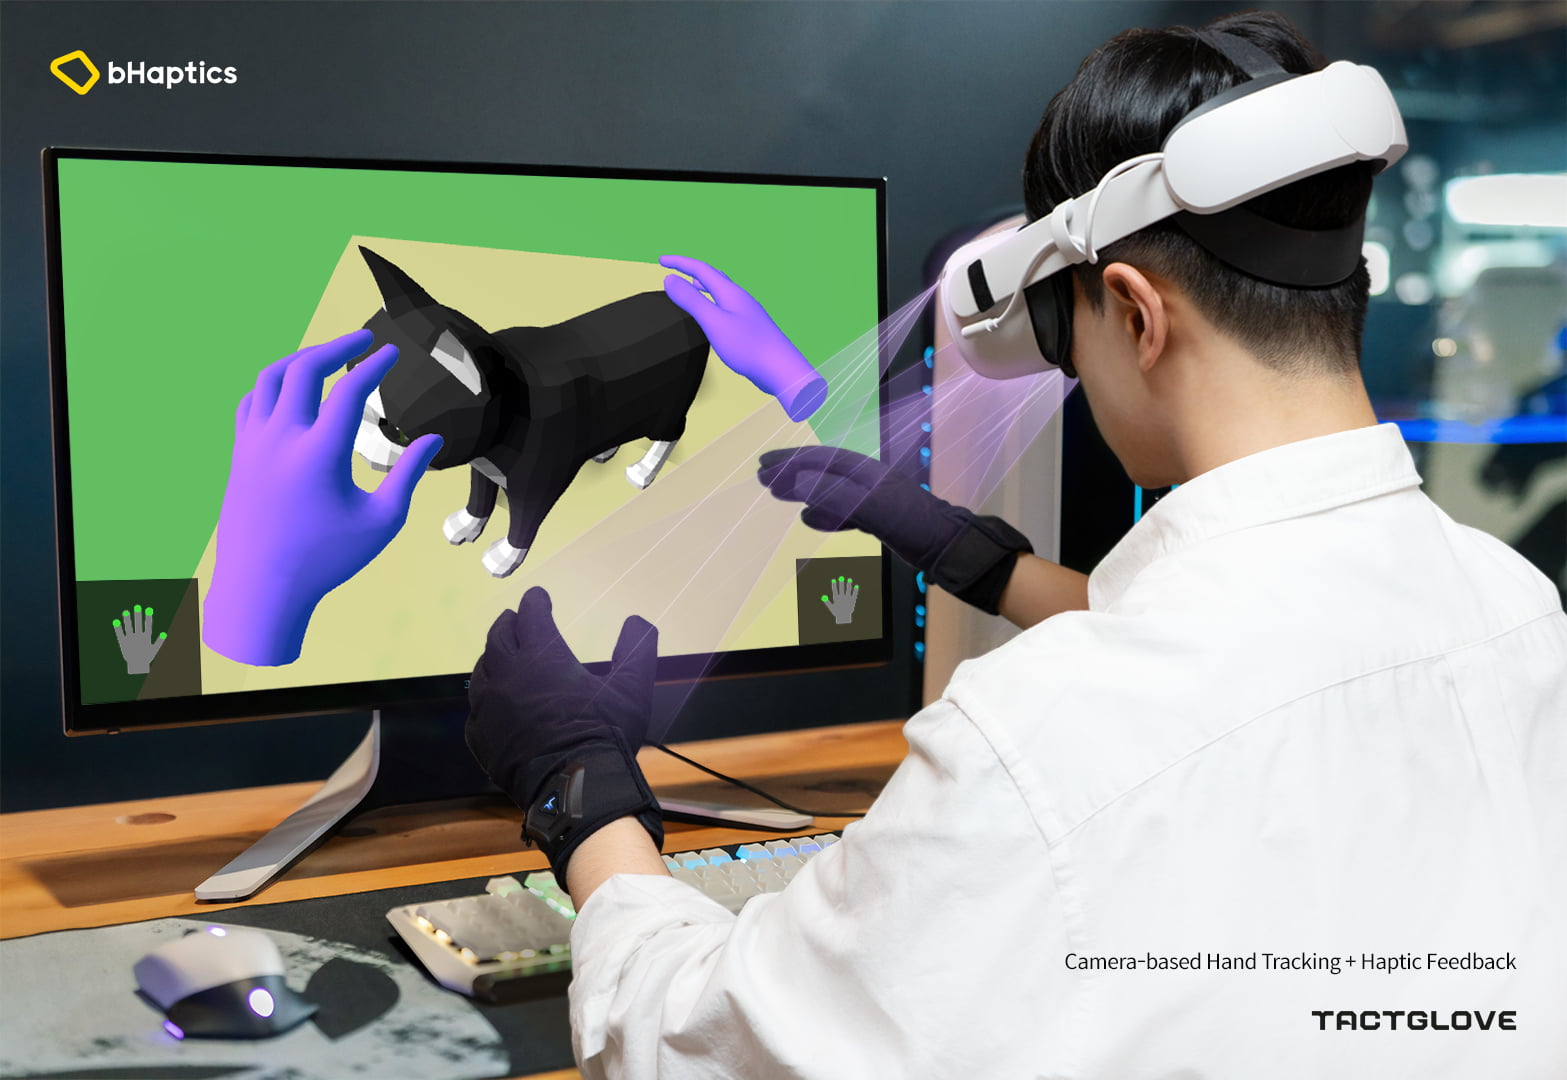 Quest 2: This haptic glove lets you feel VR